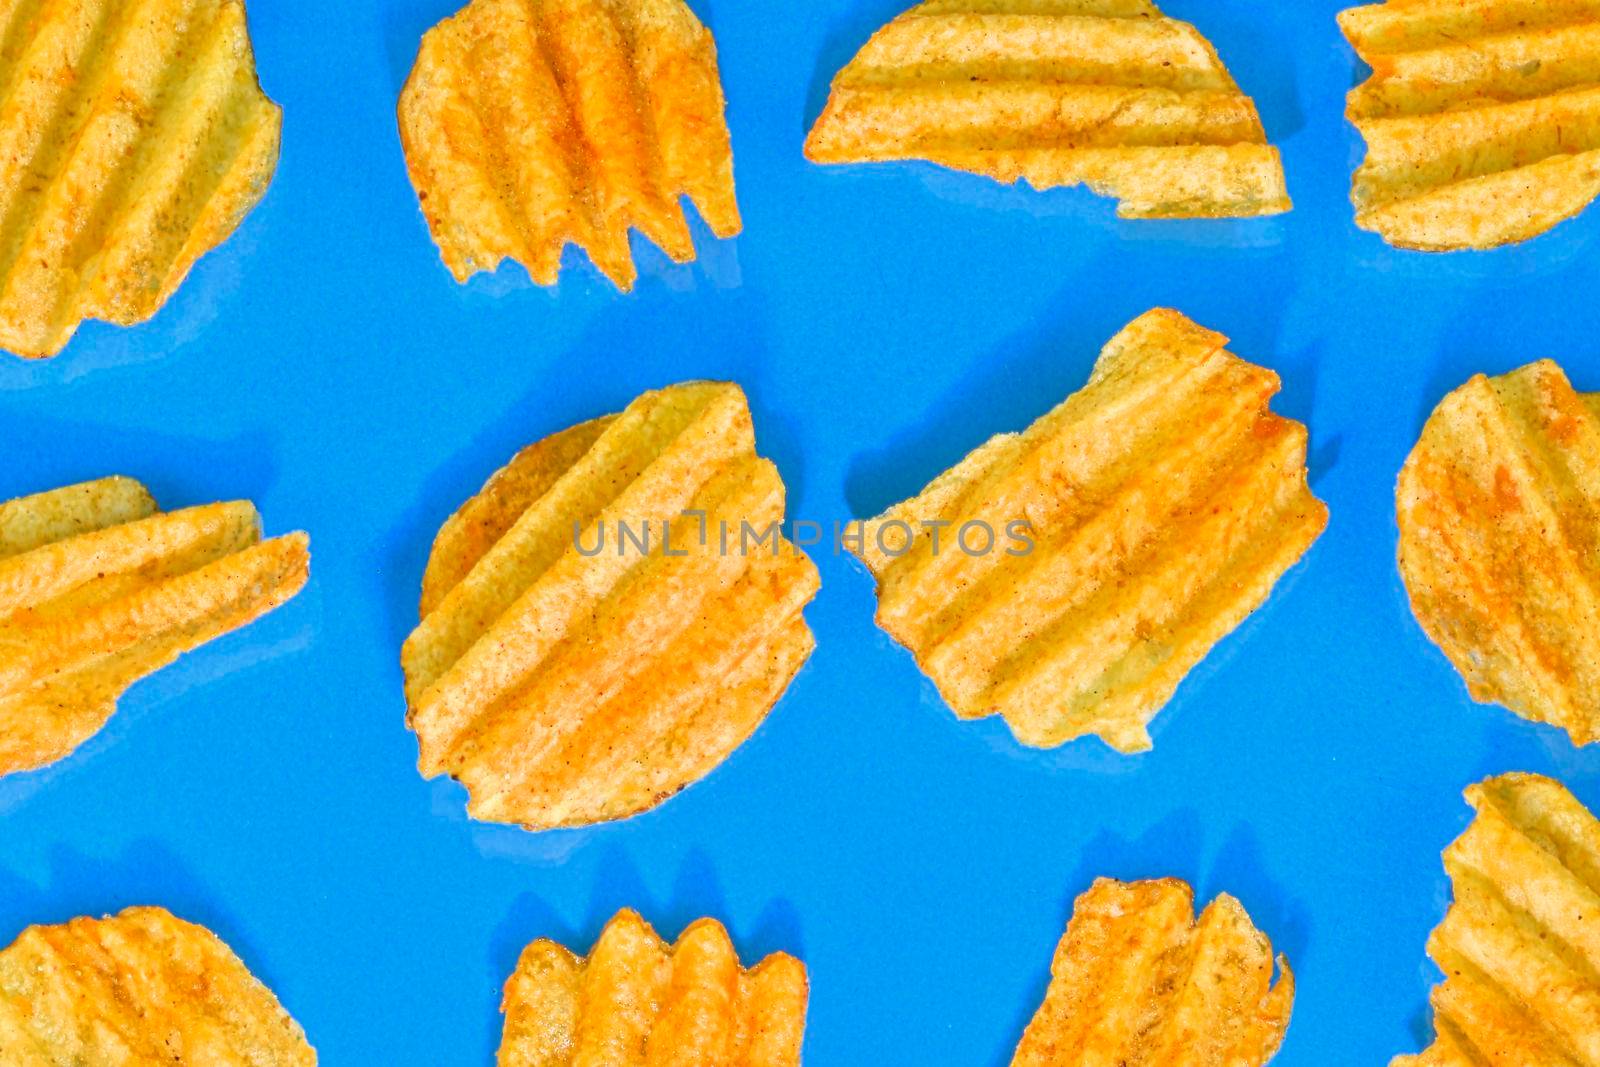 Ribbed potatoes snack with pepper on blue background. Ridged potato chips on blue background. Collection. Flat lay. Close-up.